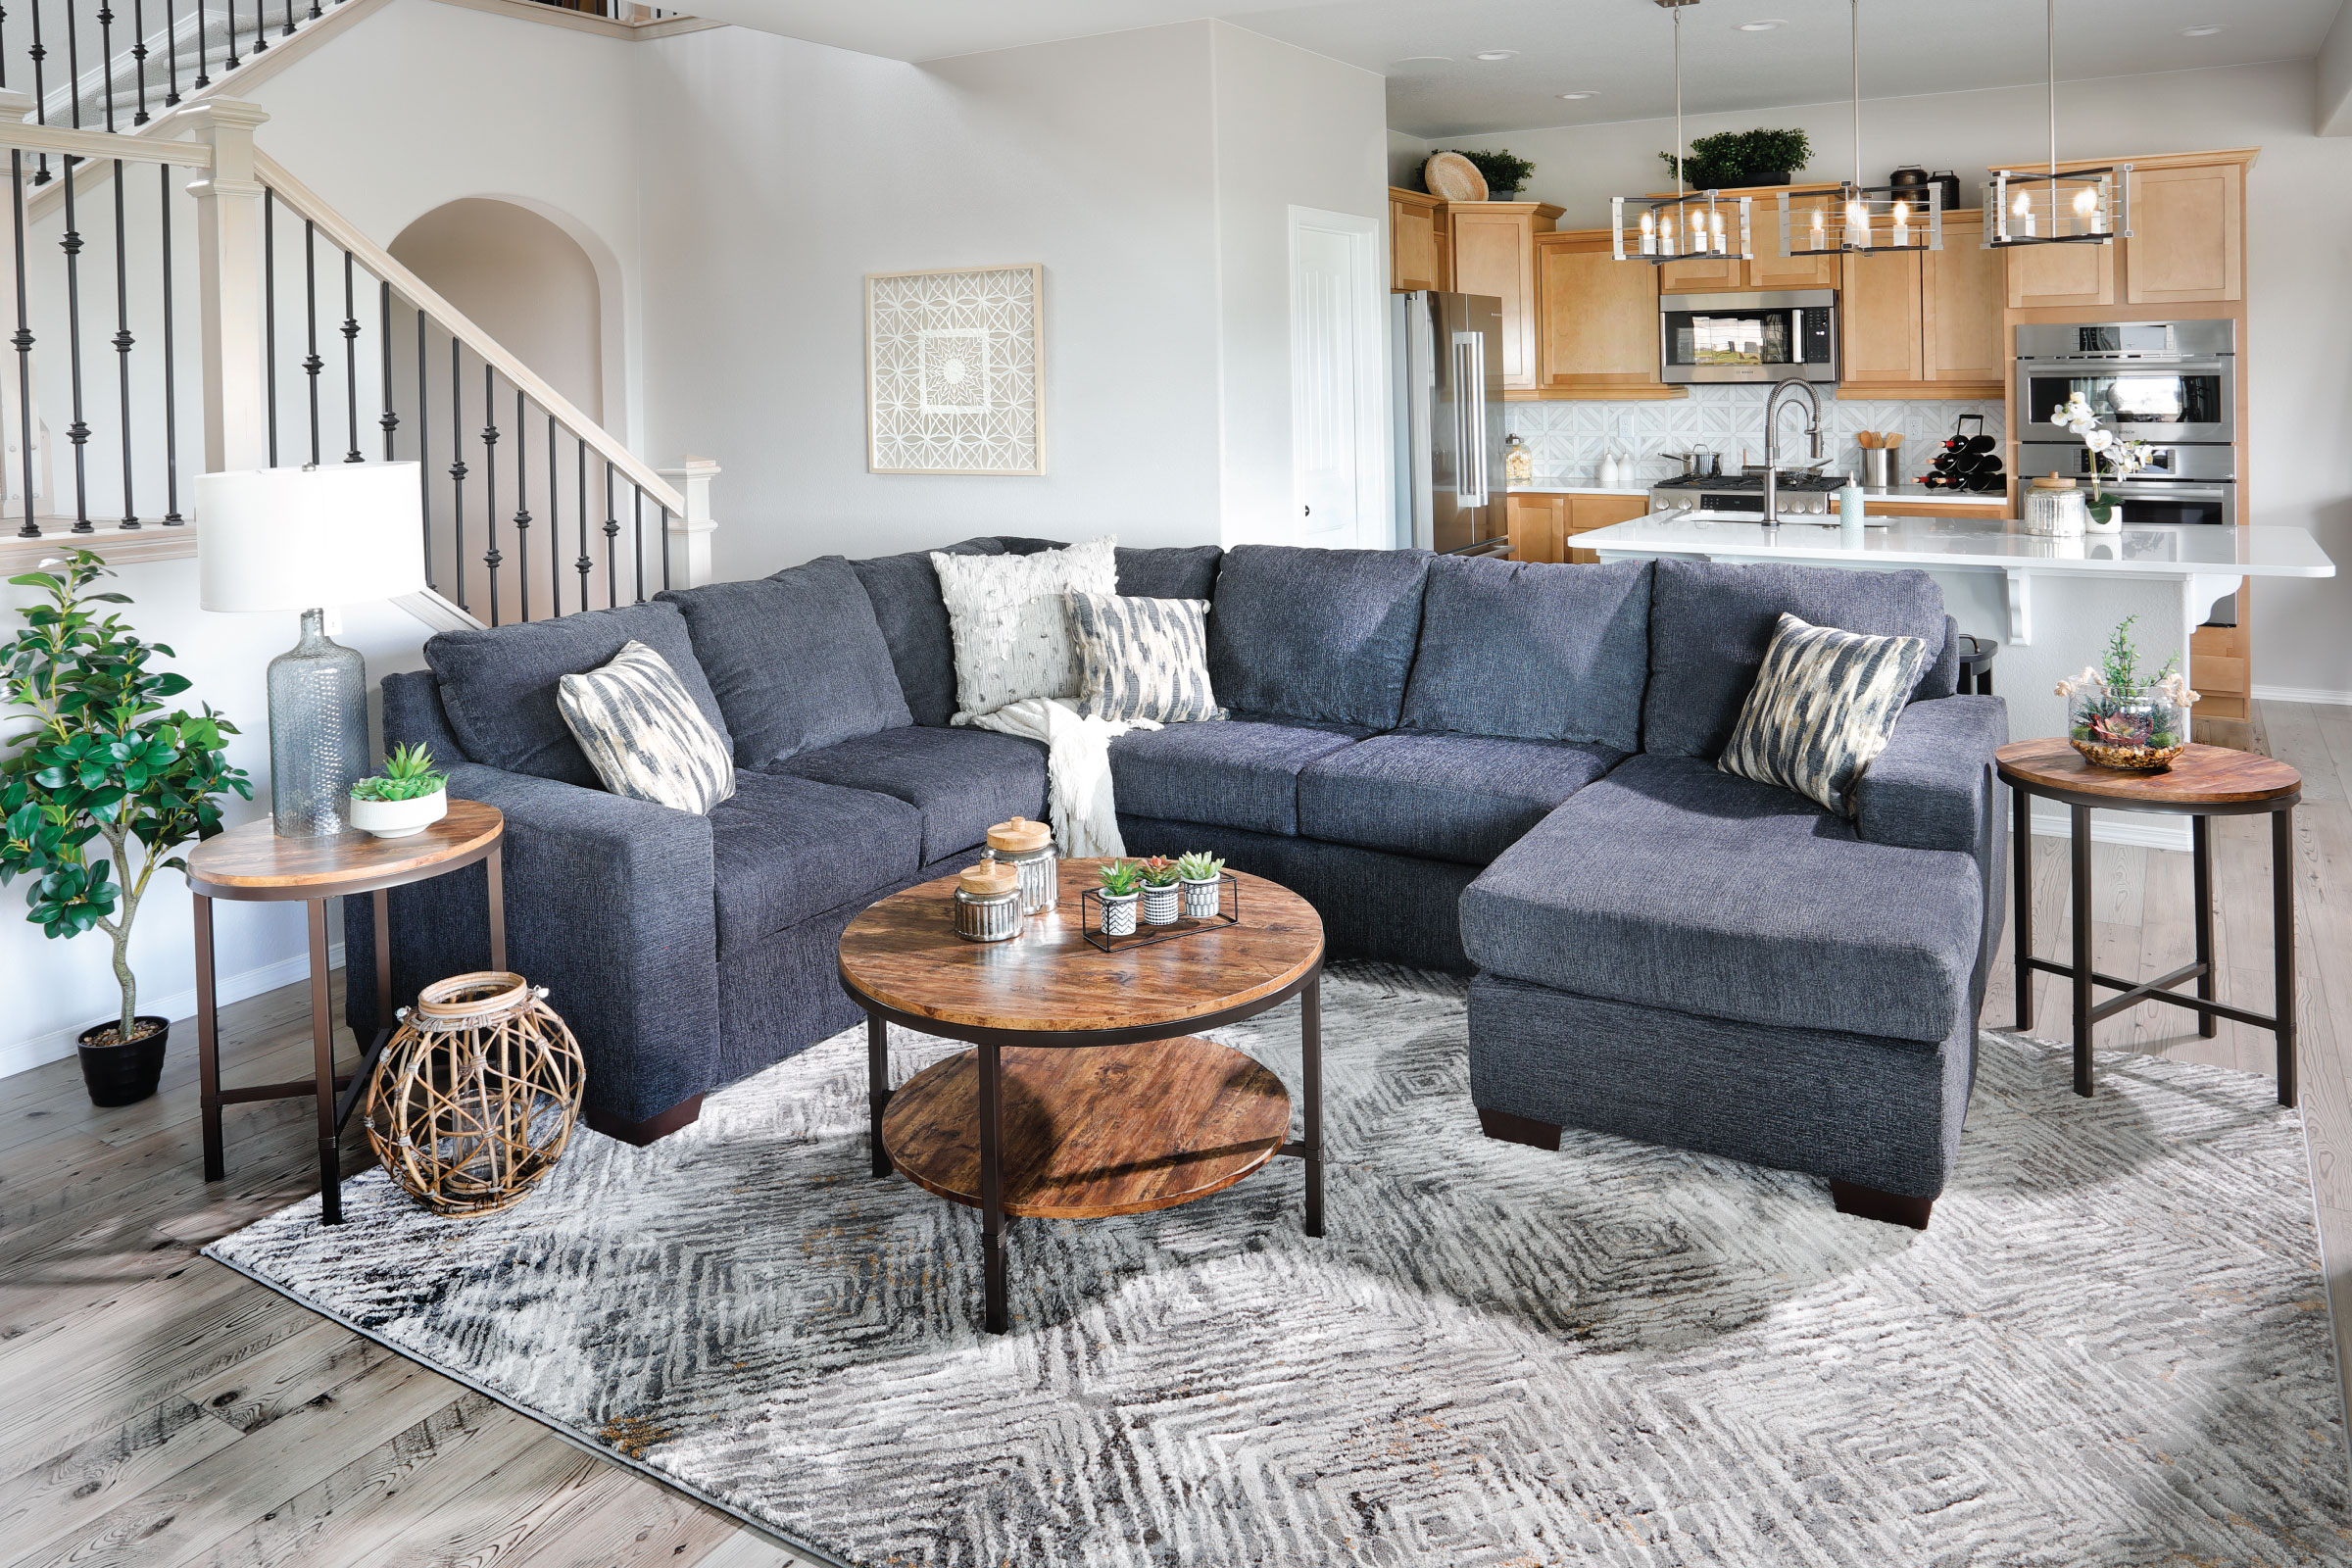 Gray Straight Lined sectional with Rustic organic wood decor around it.